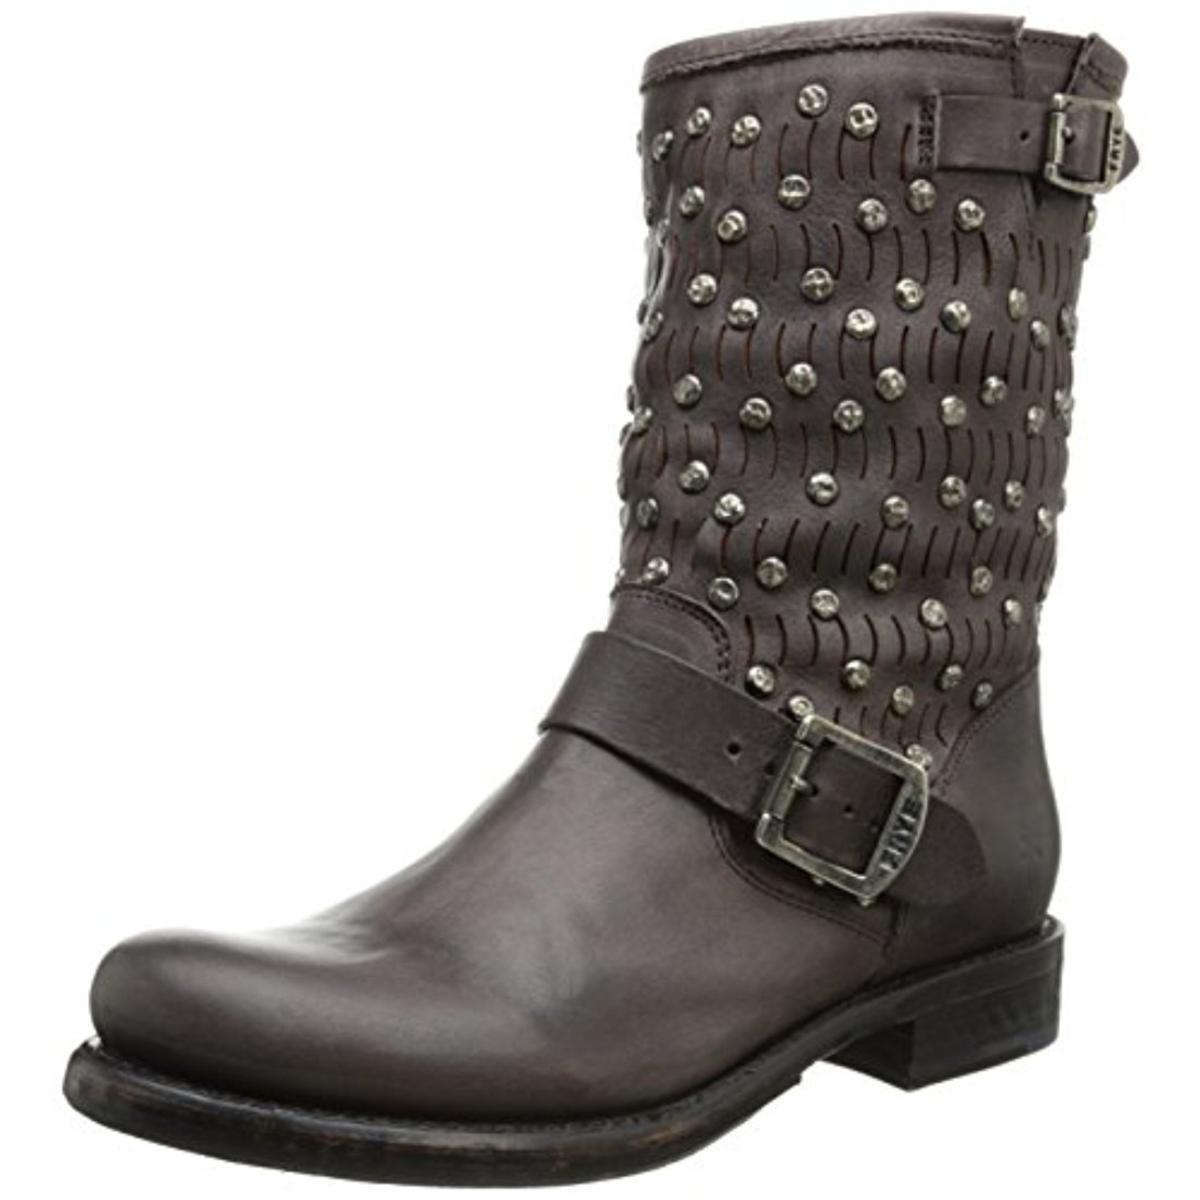 Frye 7363 Womens Jenna Leather Studded Ankle Motorcycle Boots Shoes ...